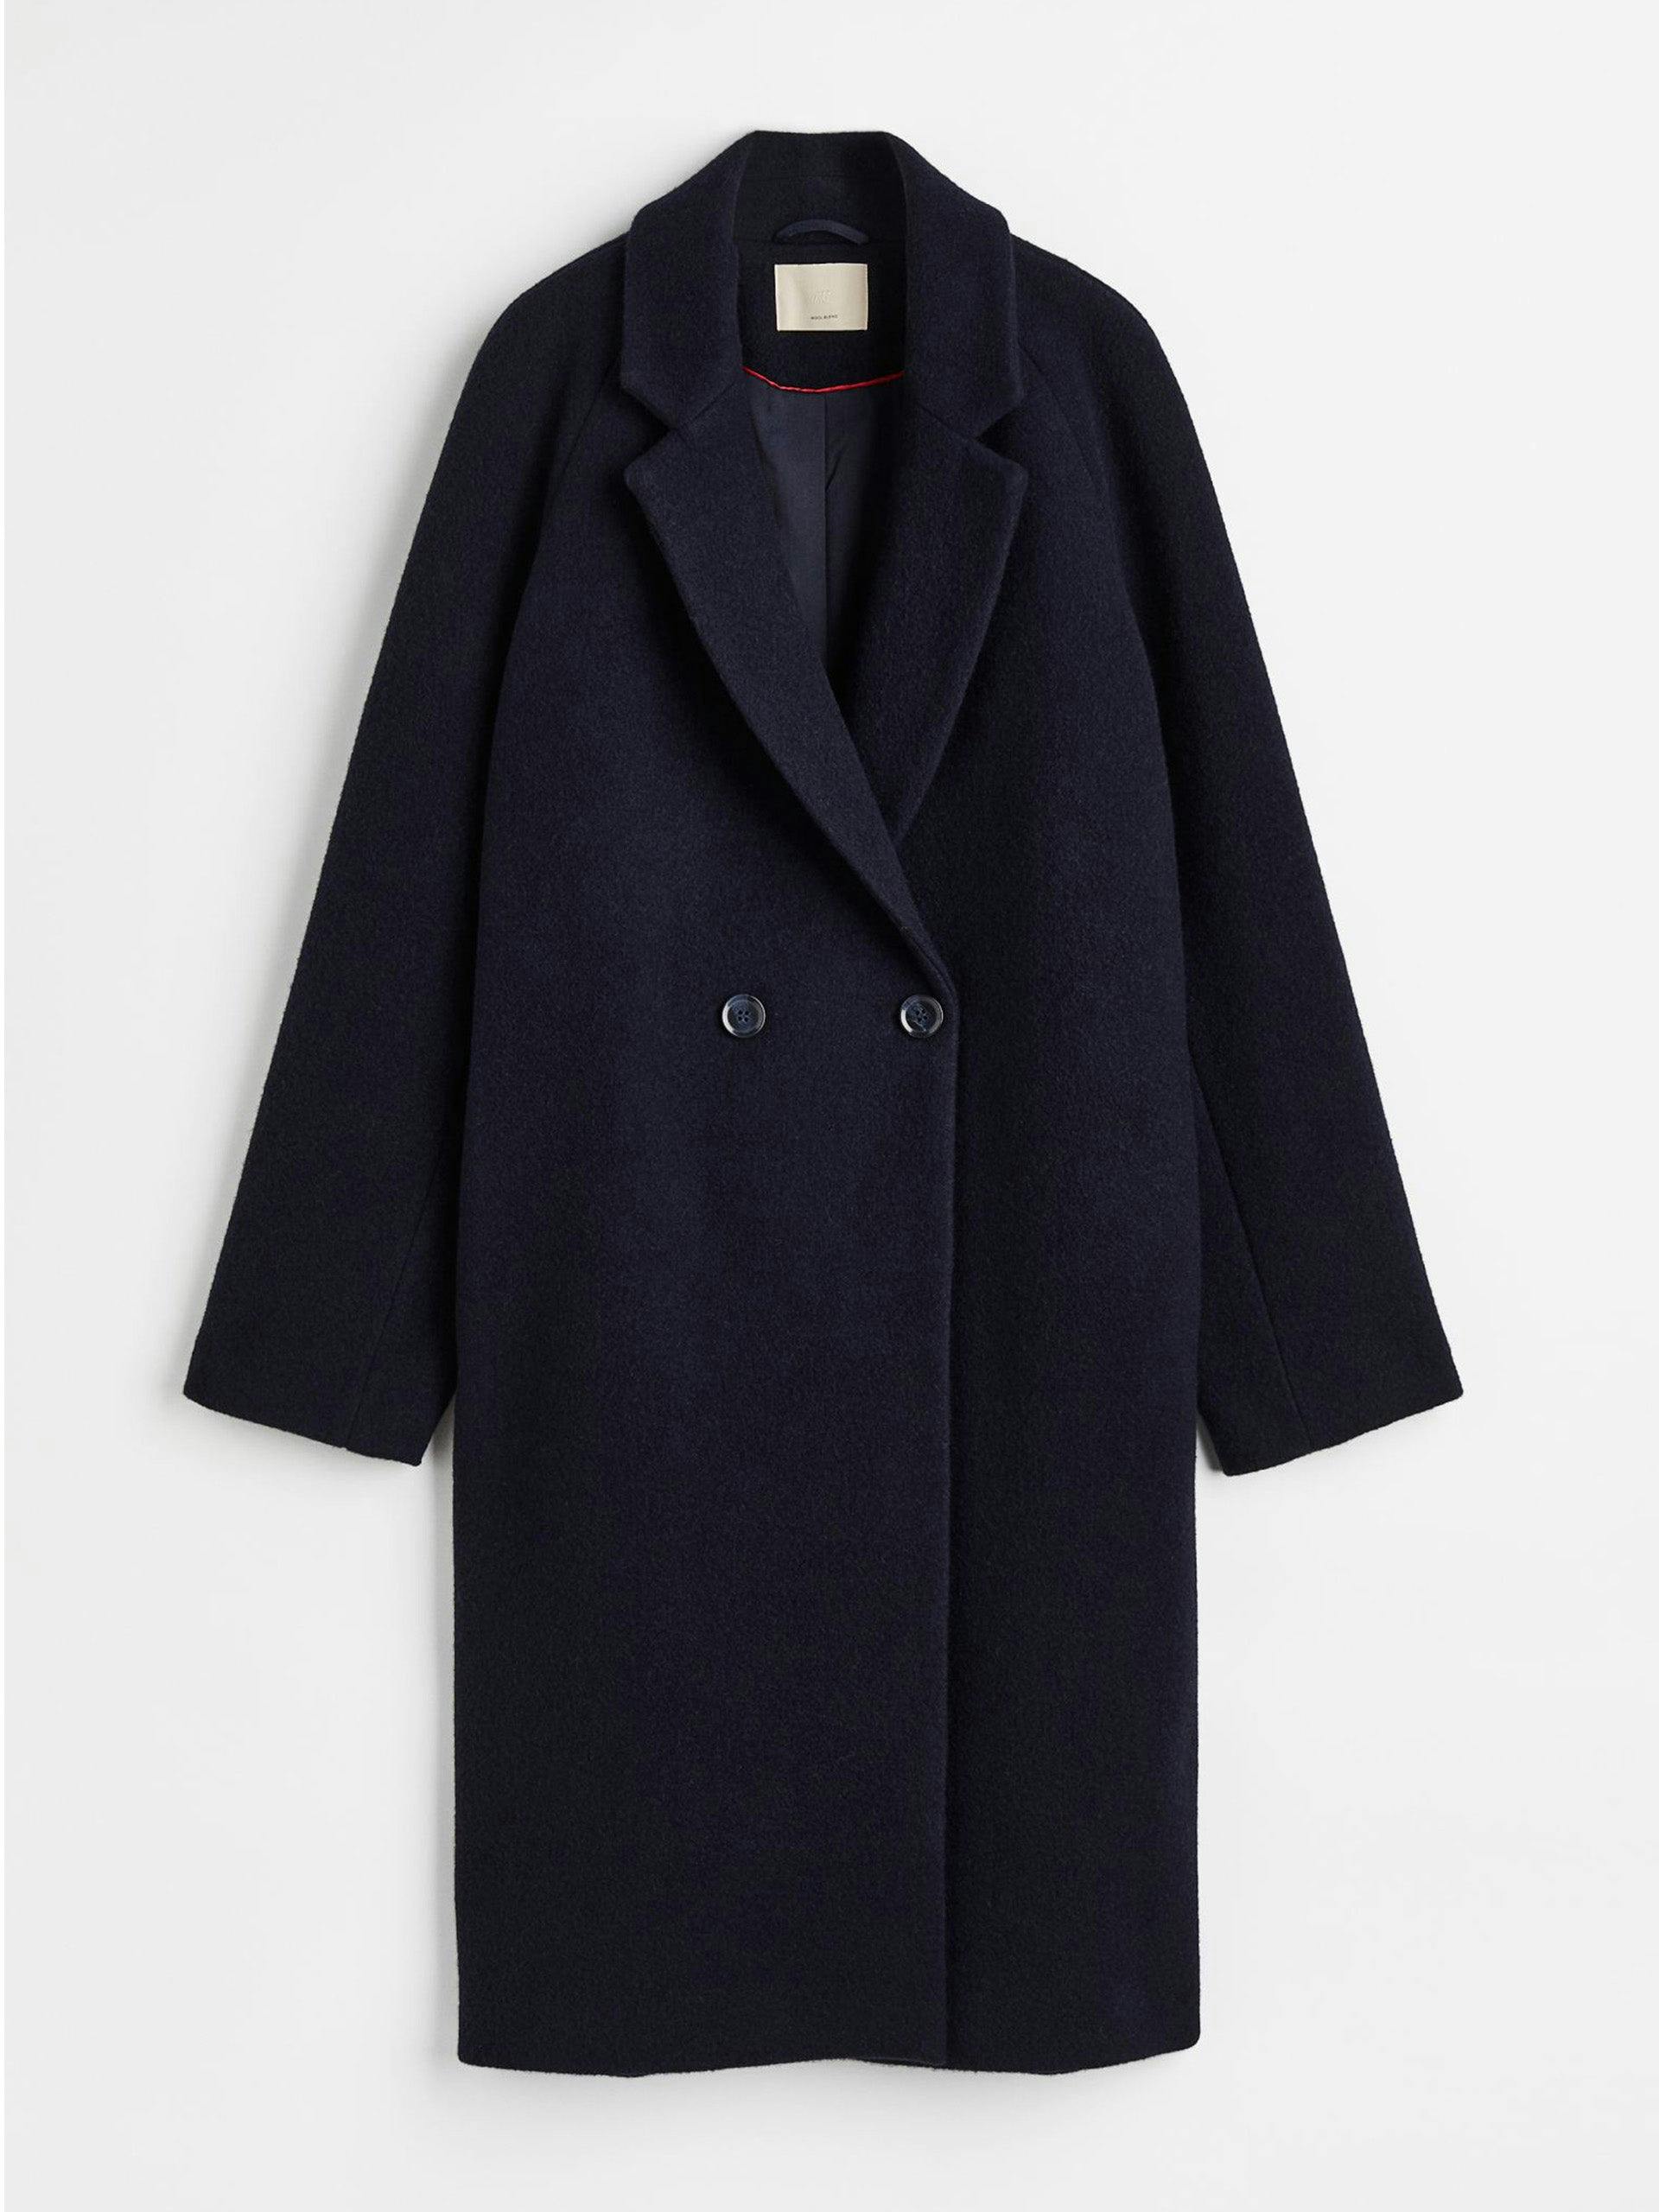 Navy double-breasted wool-blend coat